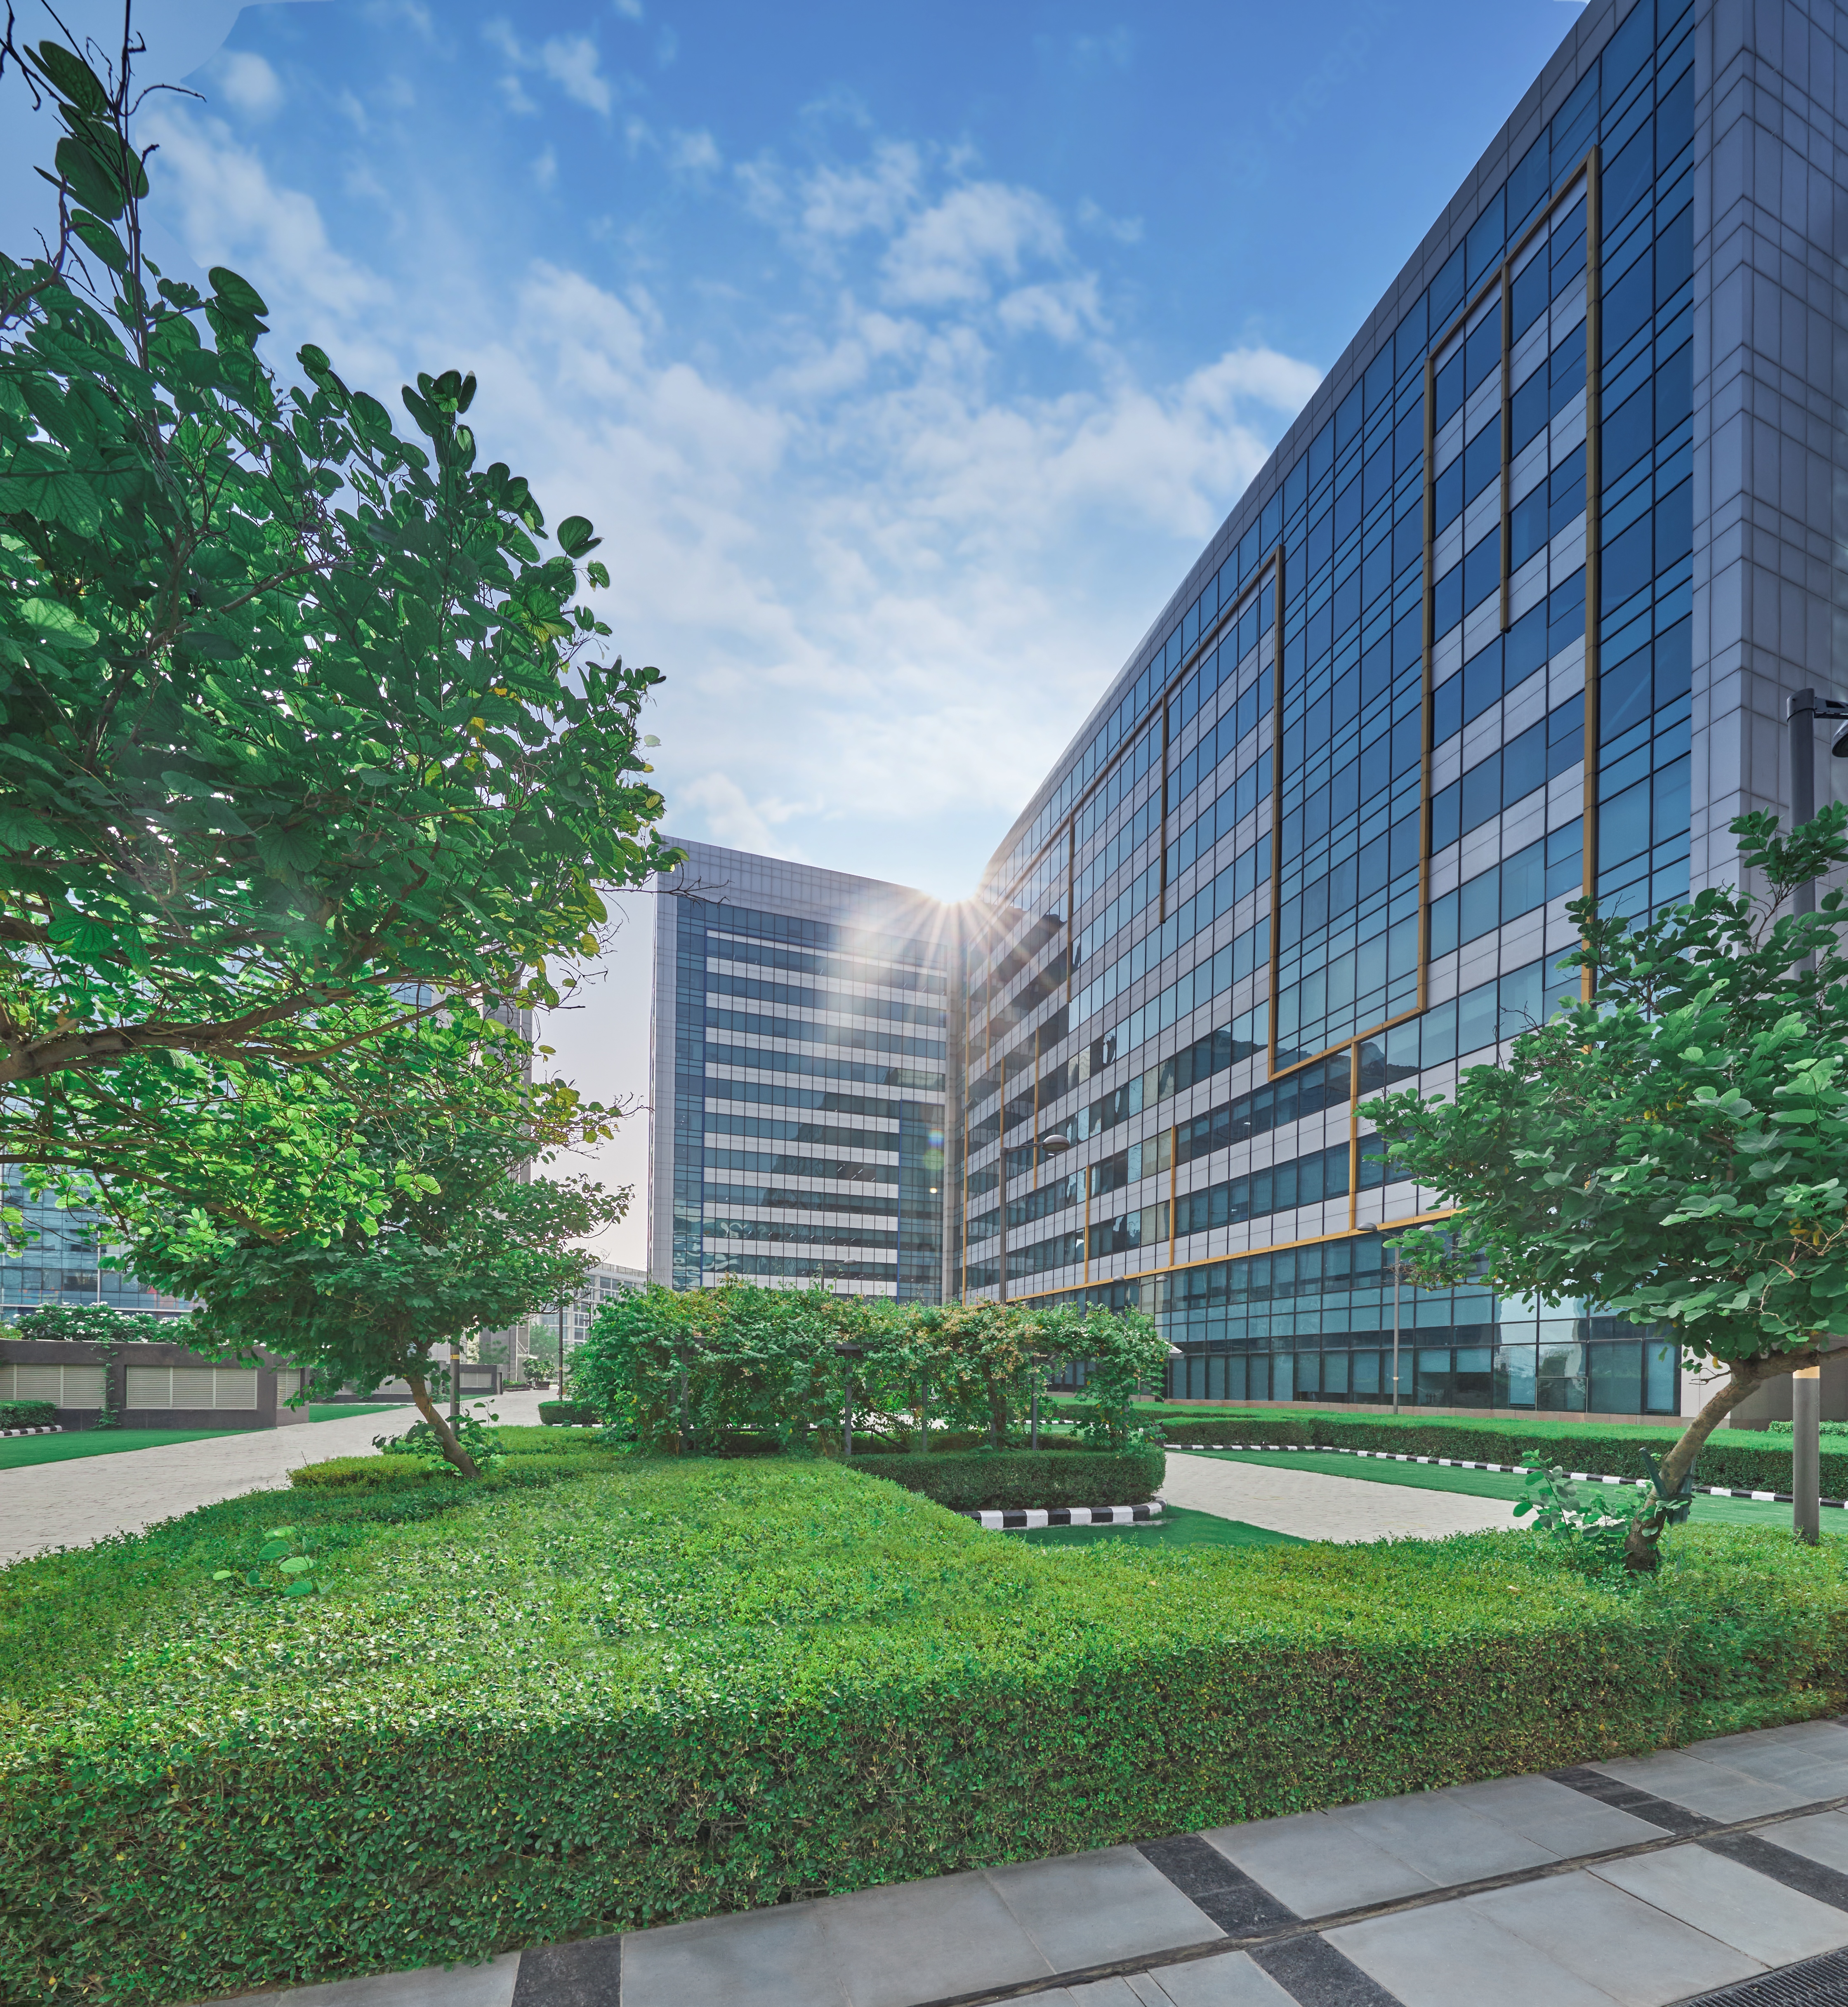 Exterior view of office buildings with greenery